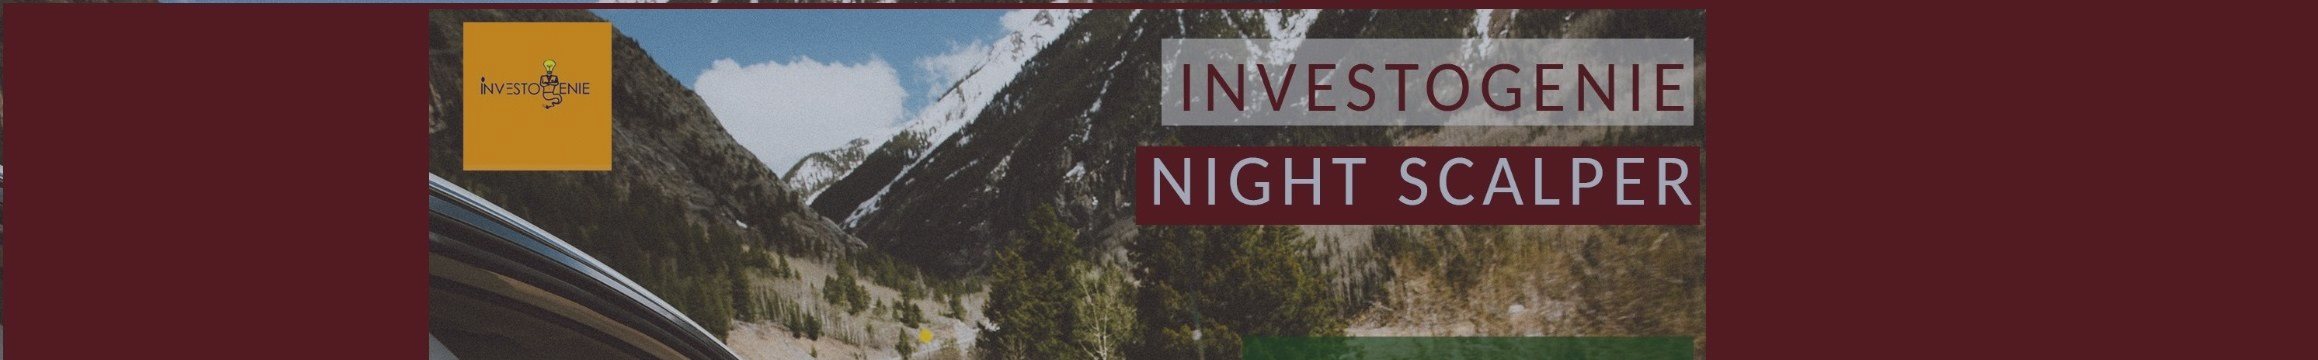 The Night Scalper (Investogenie) - Exceptional May Results